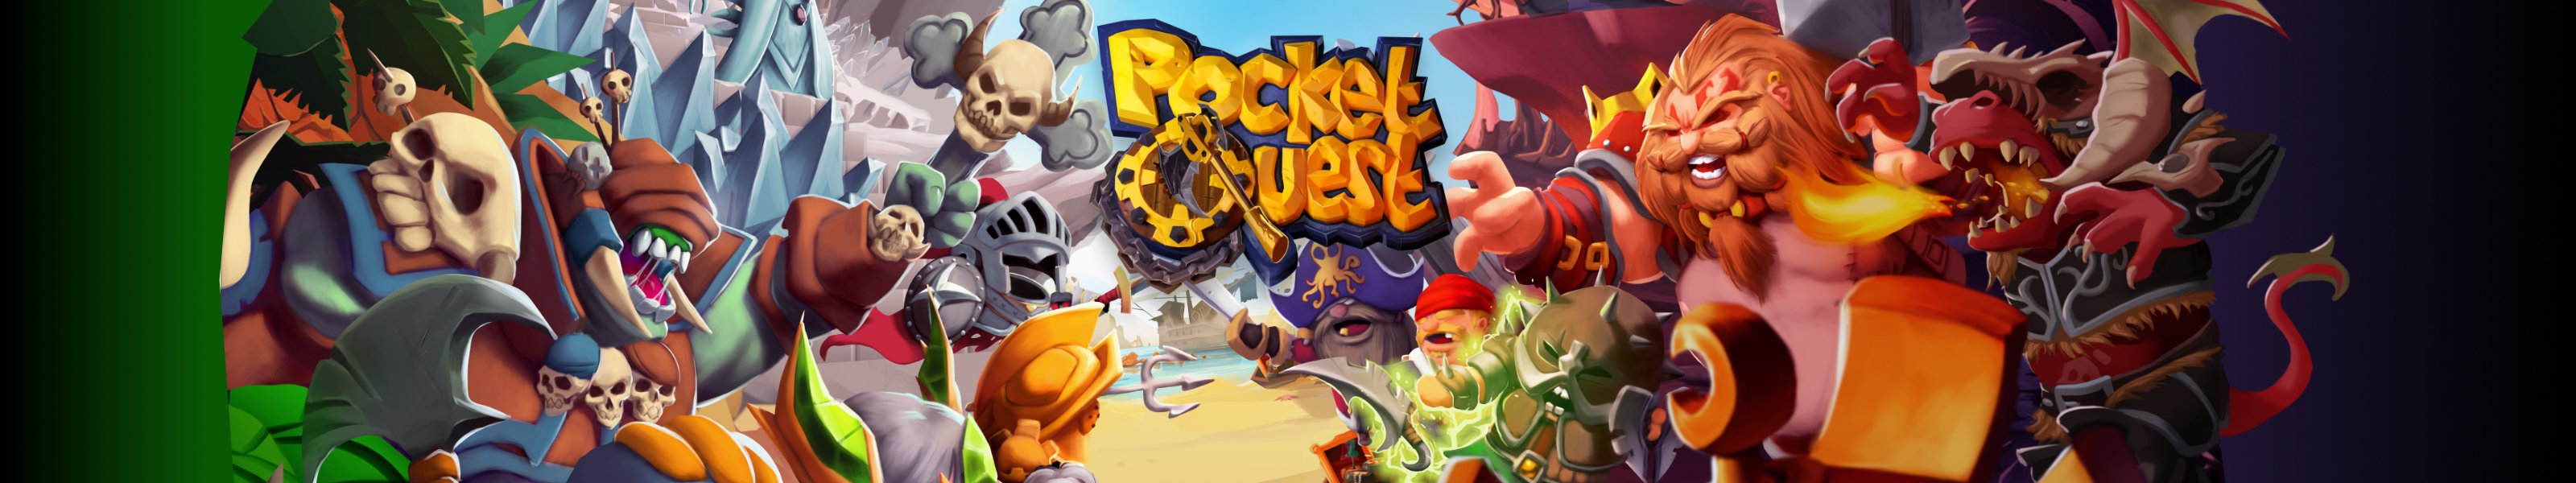 Two teams of heroes & monsters face off against each other. The Pocket Quest logo is in between them.